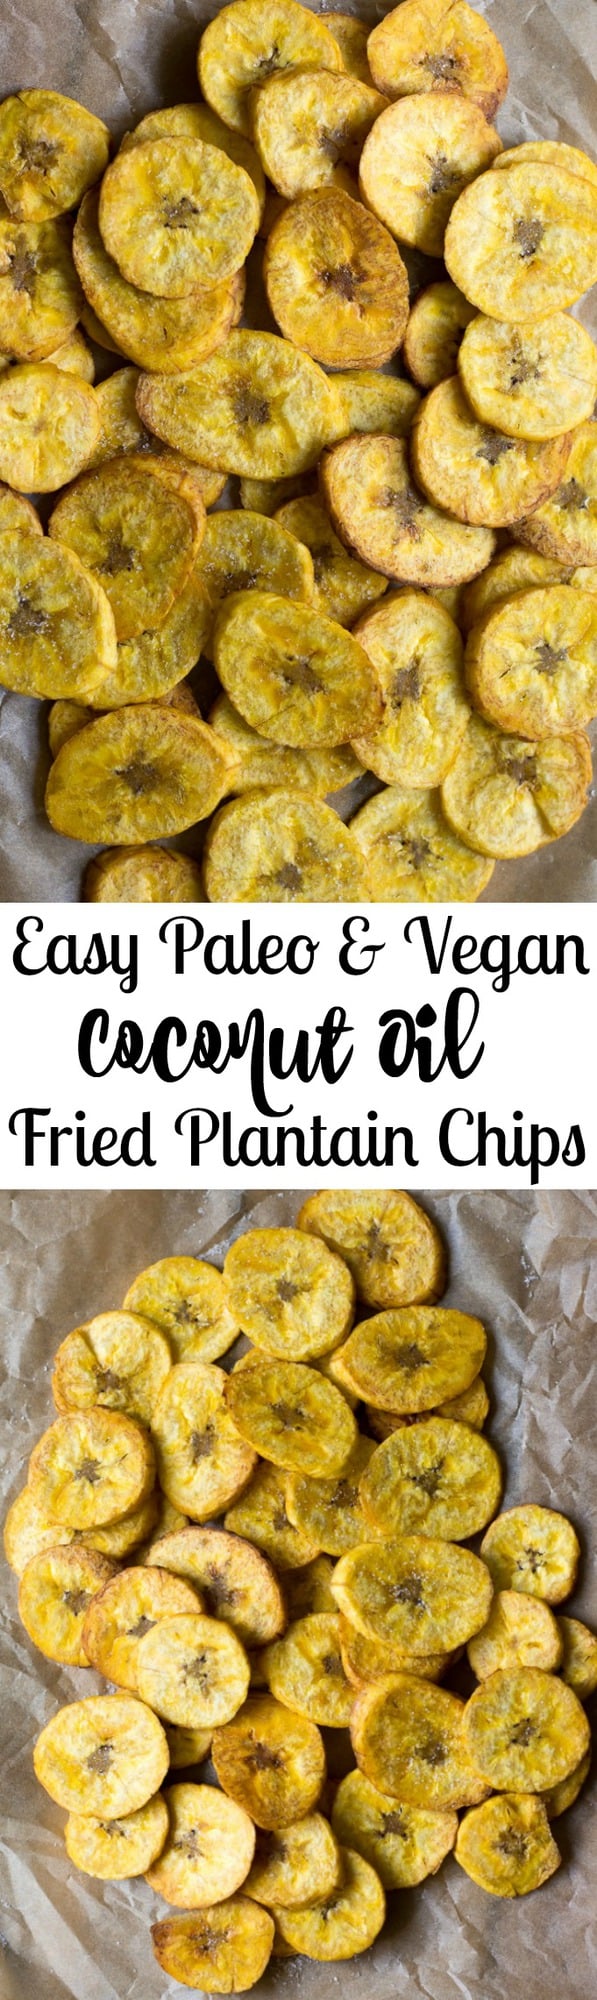 Easy Paleo, vegan and Whole30 coconut oil fried plantain chips